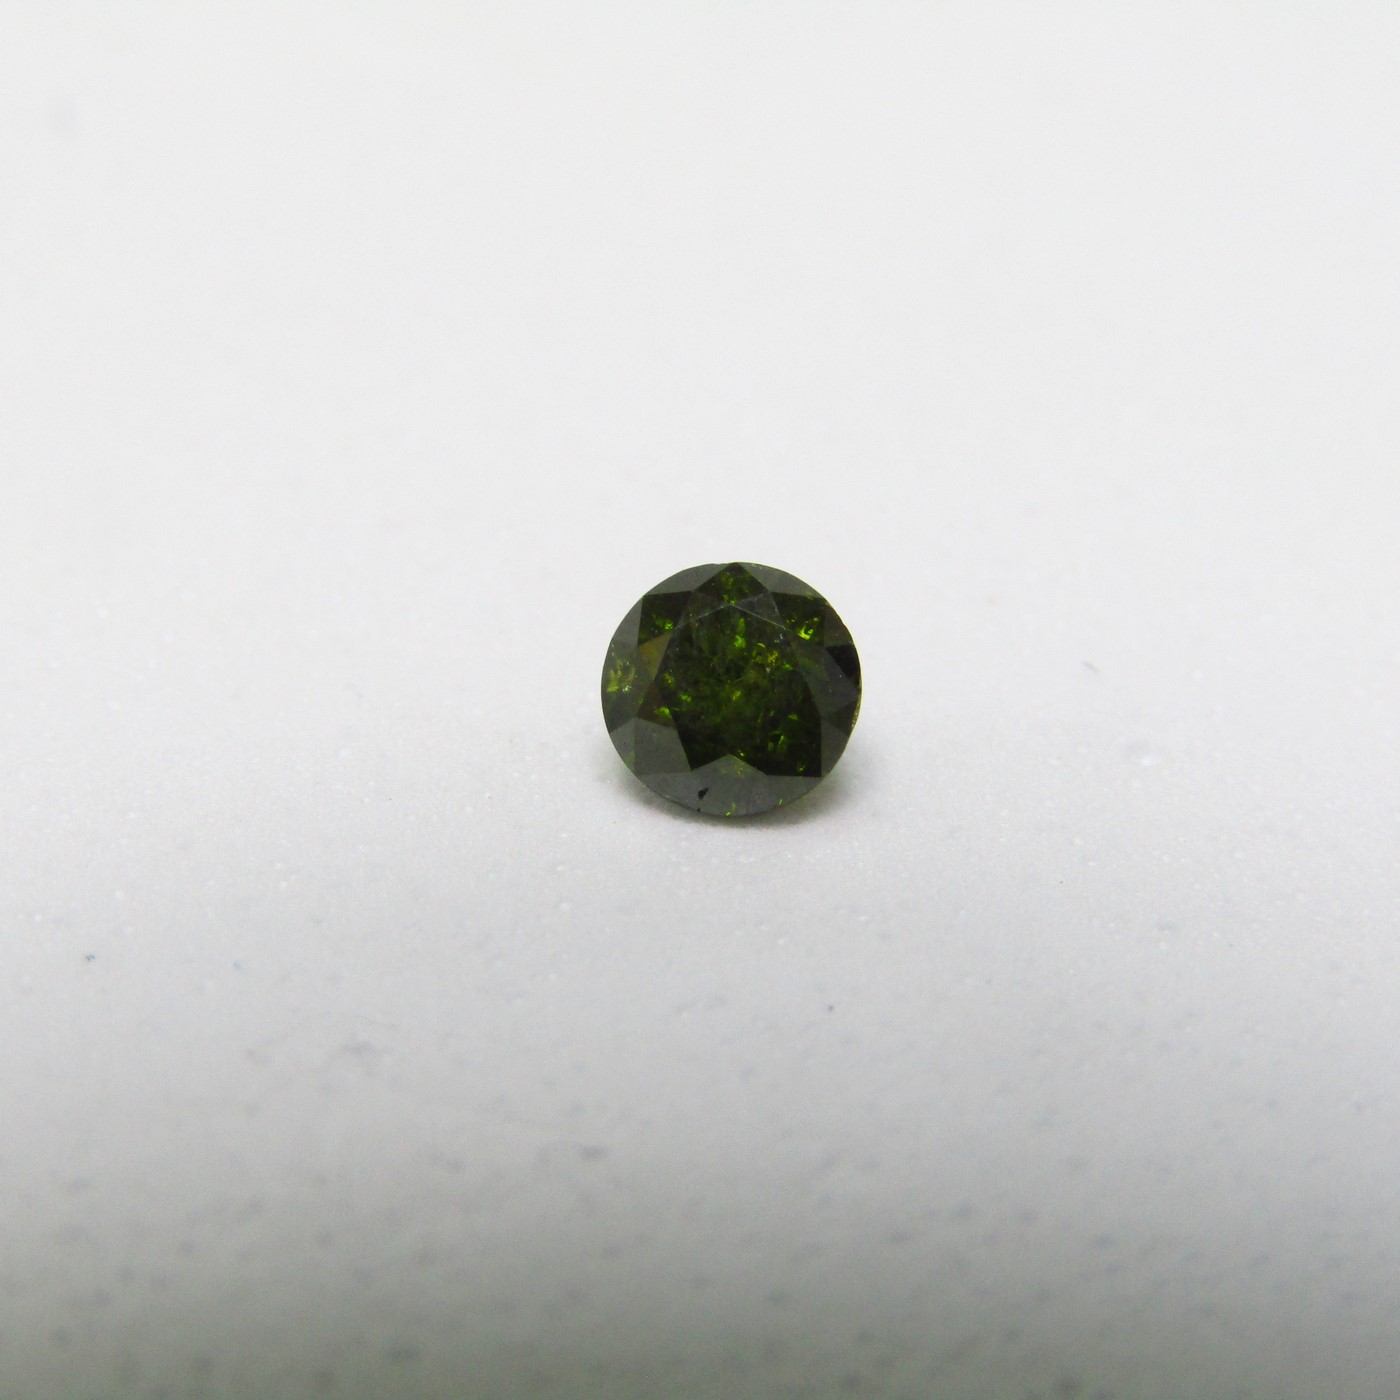 0,45 ct Natural Diamond. Size: Brilliant. Color: Fancy Olive Green. Purity: P1. No treatment data.